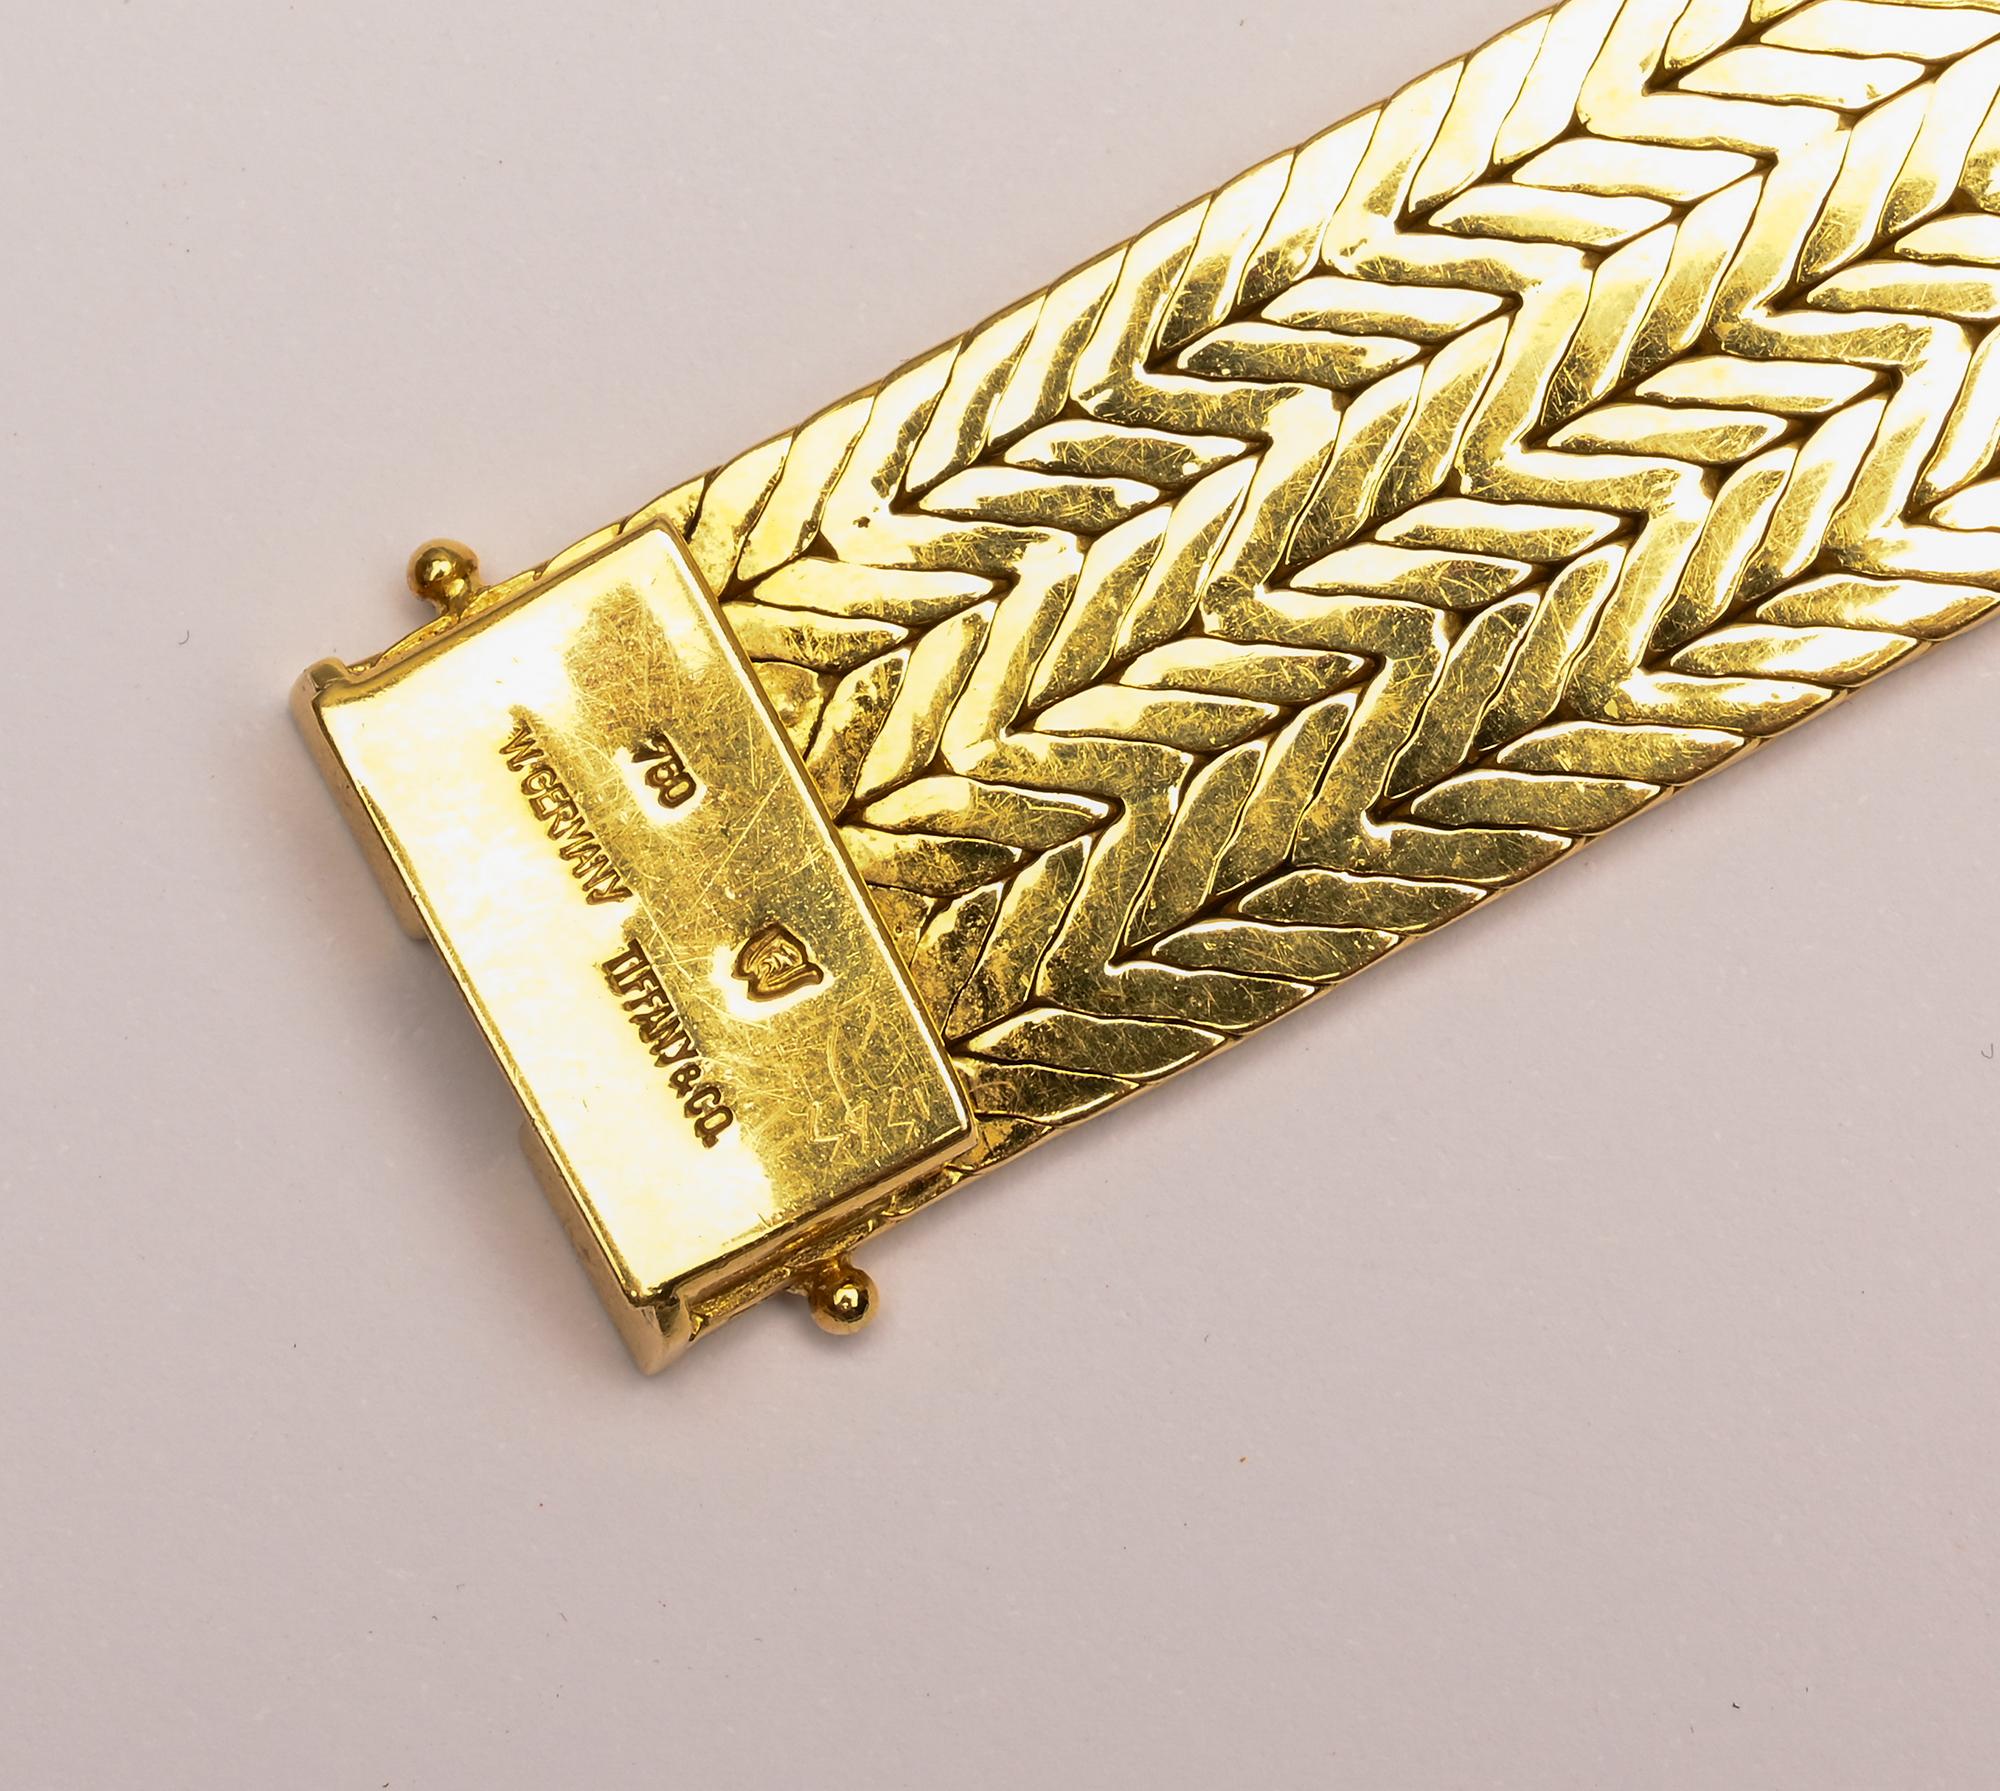 Tiffany & Co. Herringbone Weave Gold Bracelet In Excellent Condition For Sale In Darnestown, MD